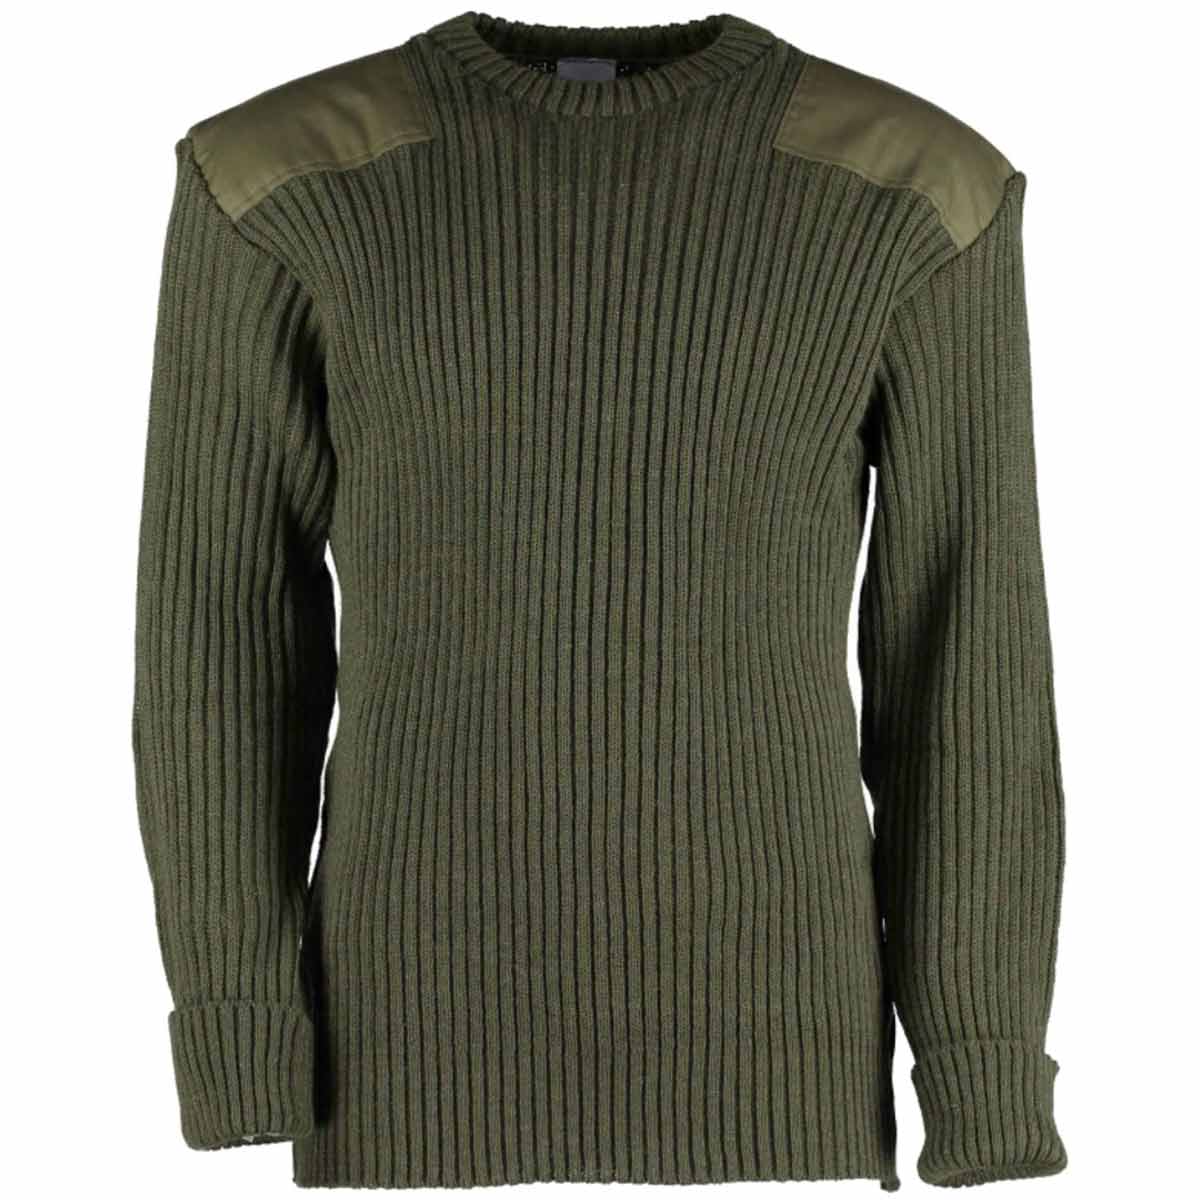 Army Wooly Pully 100% Wool Commando Jumper Sweater Shoulder Elbow ...